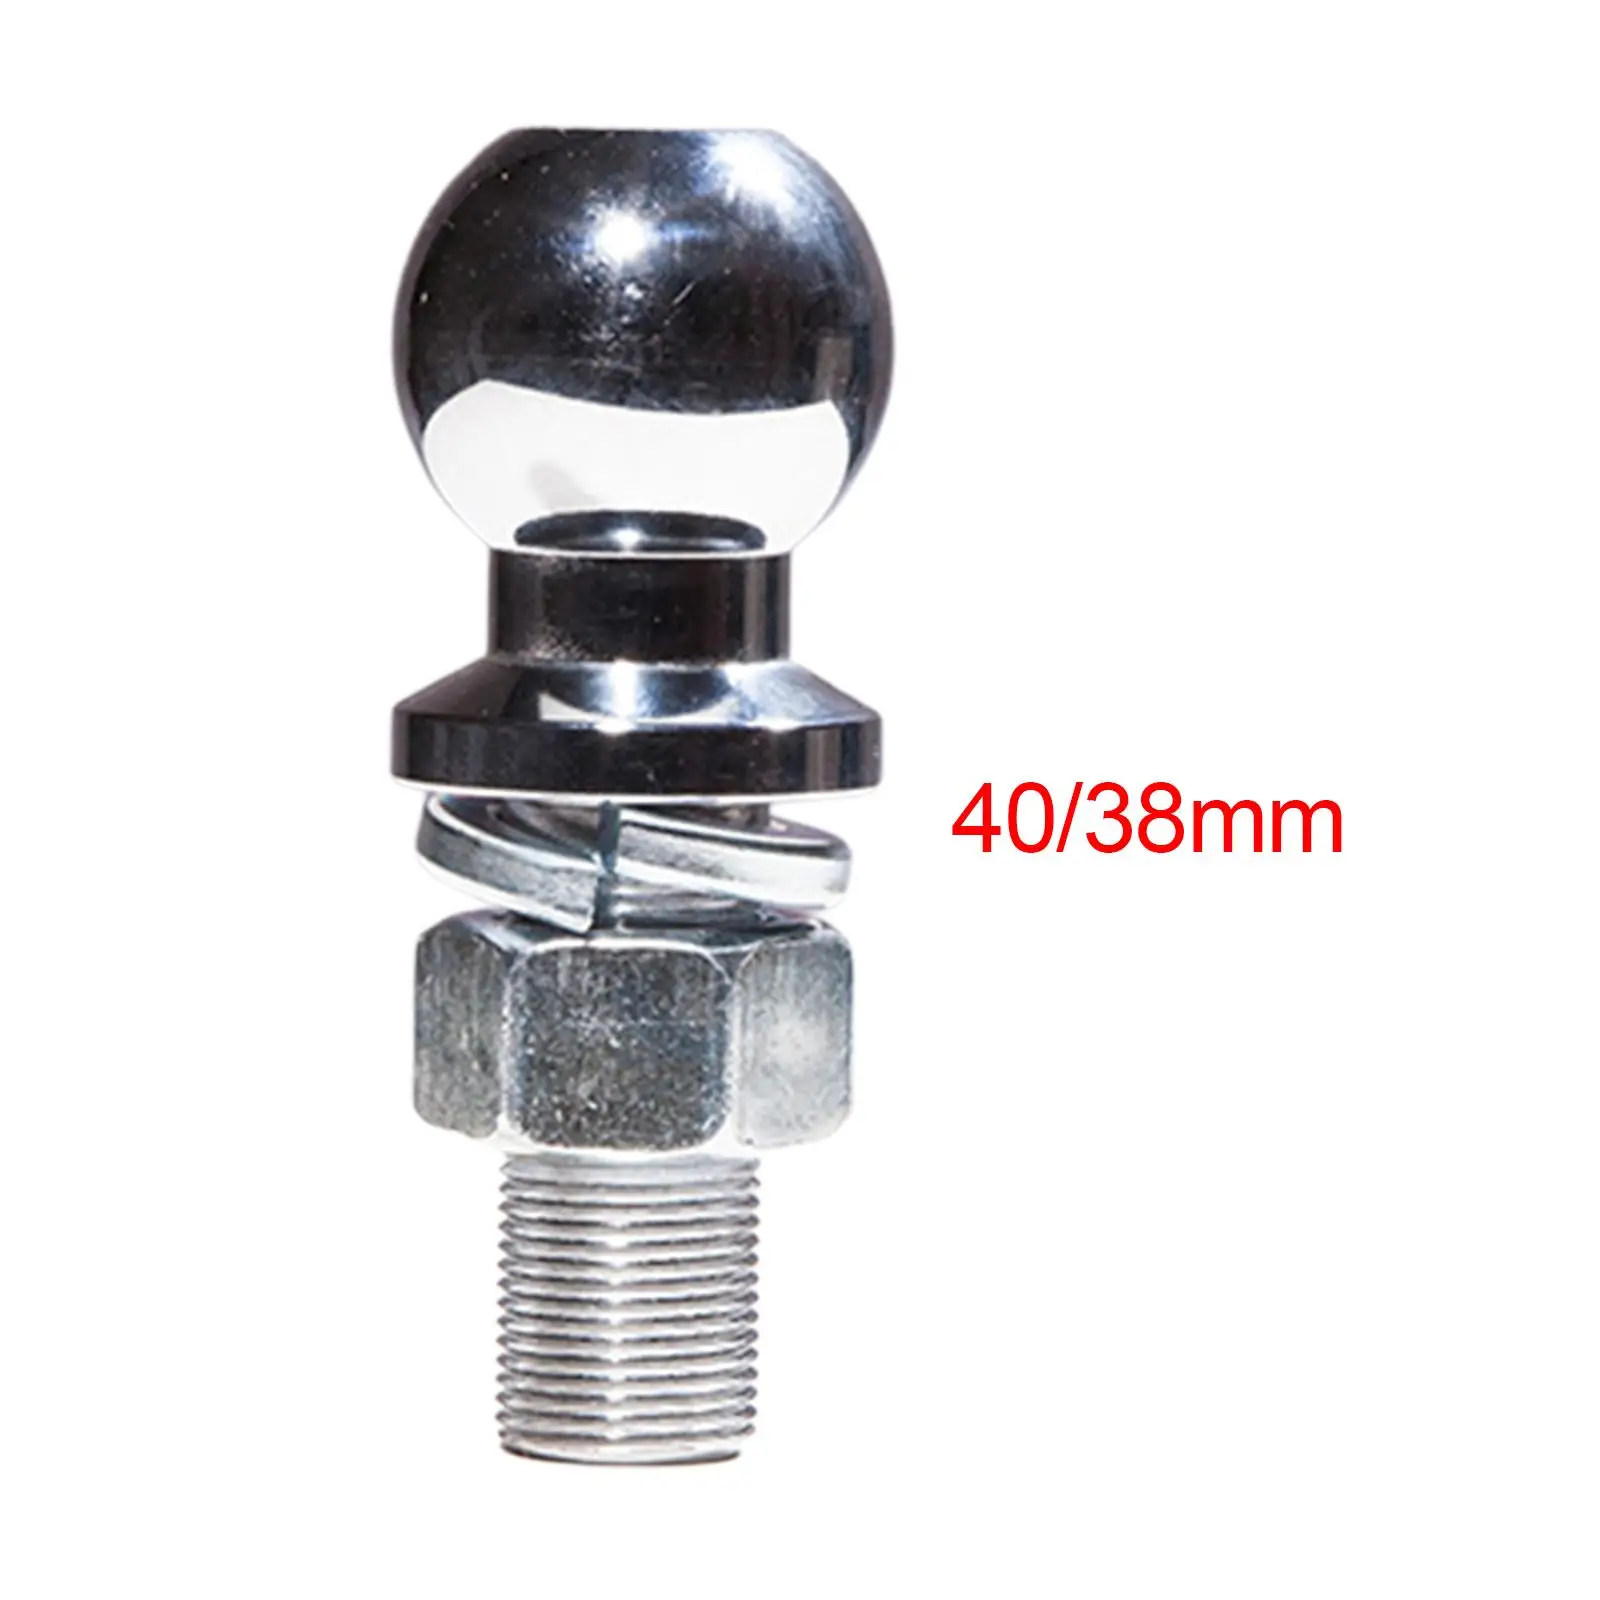 Trailer Hitch Ball 2 inch Spare Parts Portable Durable Accessory Trailer Connector Ball Head for Vehicle Yacht RV